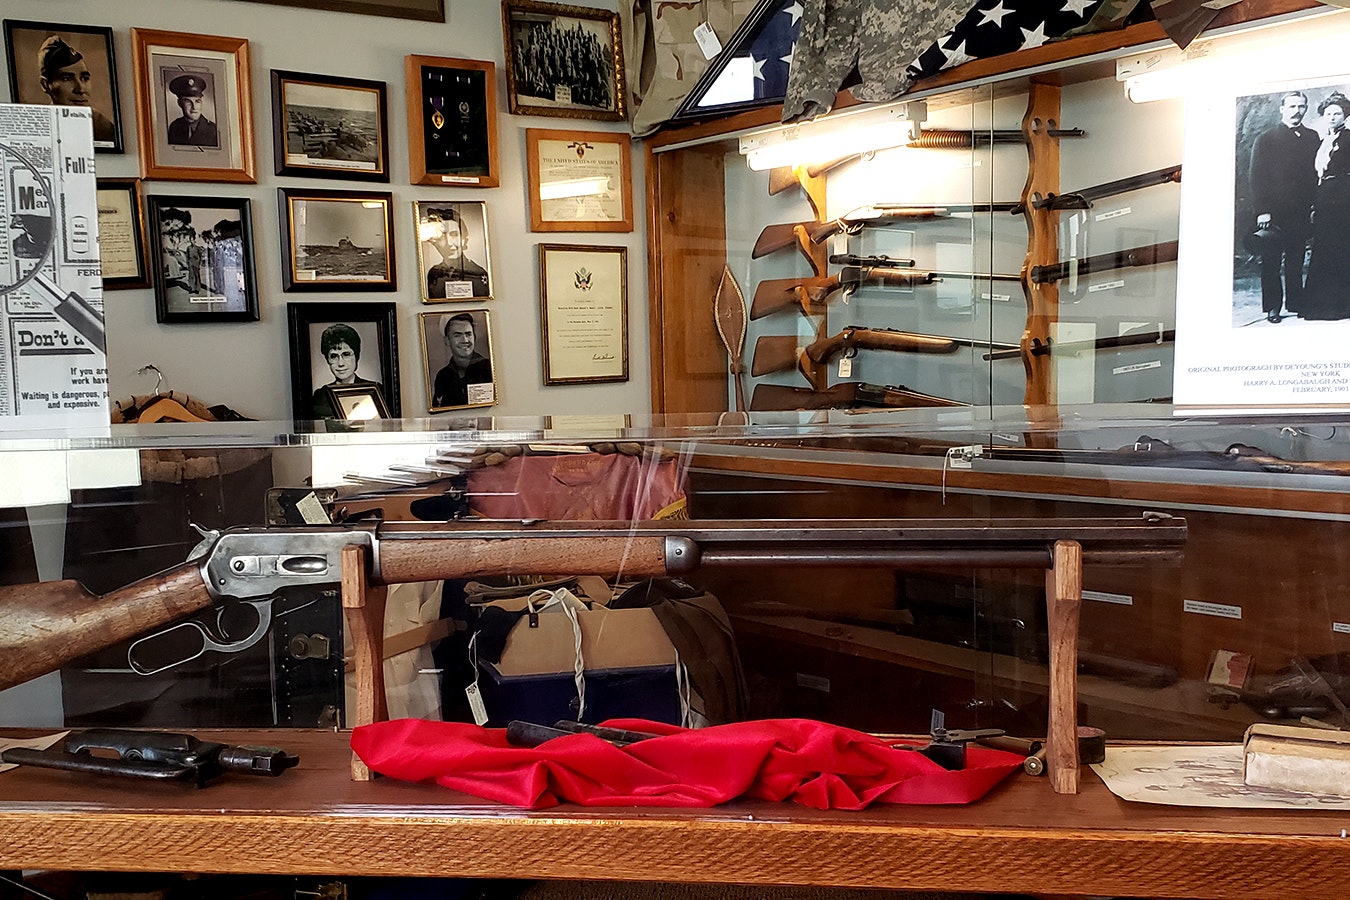 The rifle given to Jesse Galloway by Harry Alonzo Longabaugh, aka the Sundance Kid, after Galloway tried to help clear Longabaugh's name in a robbery in South Dakota. He may have been in Colorado and Wyoming working on ranches at the time.